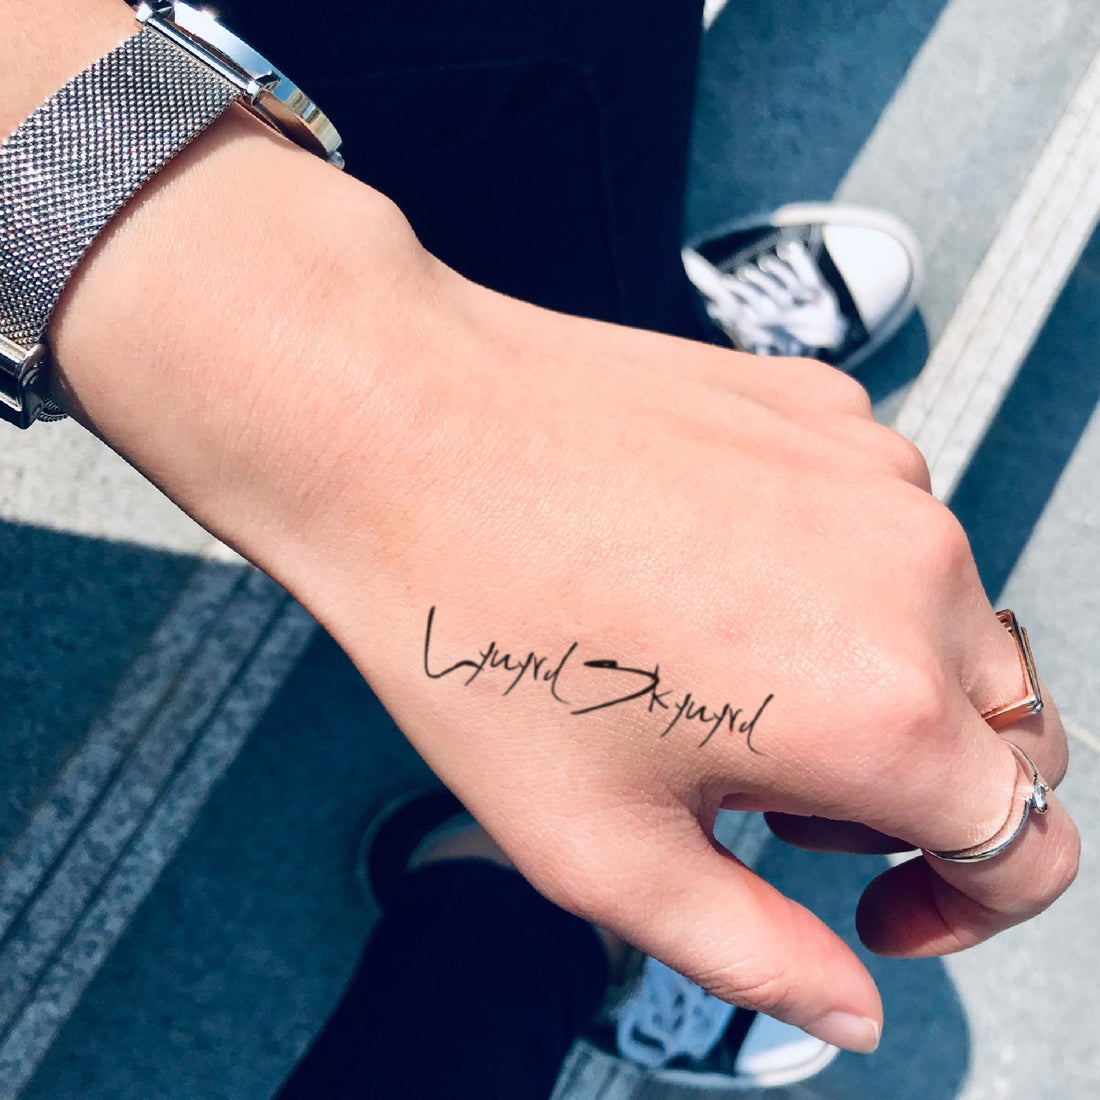 Lynyrd Skynyrd custom temporary tattoo sticker design idea inspiration meanings removal arm wrist hand words font name signature calligraphy lyrics tour concert outfits merch accessory gift souvenir costumes wear dress up code